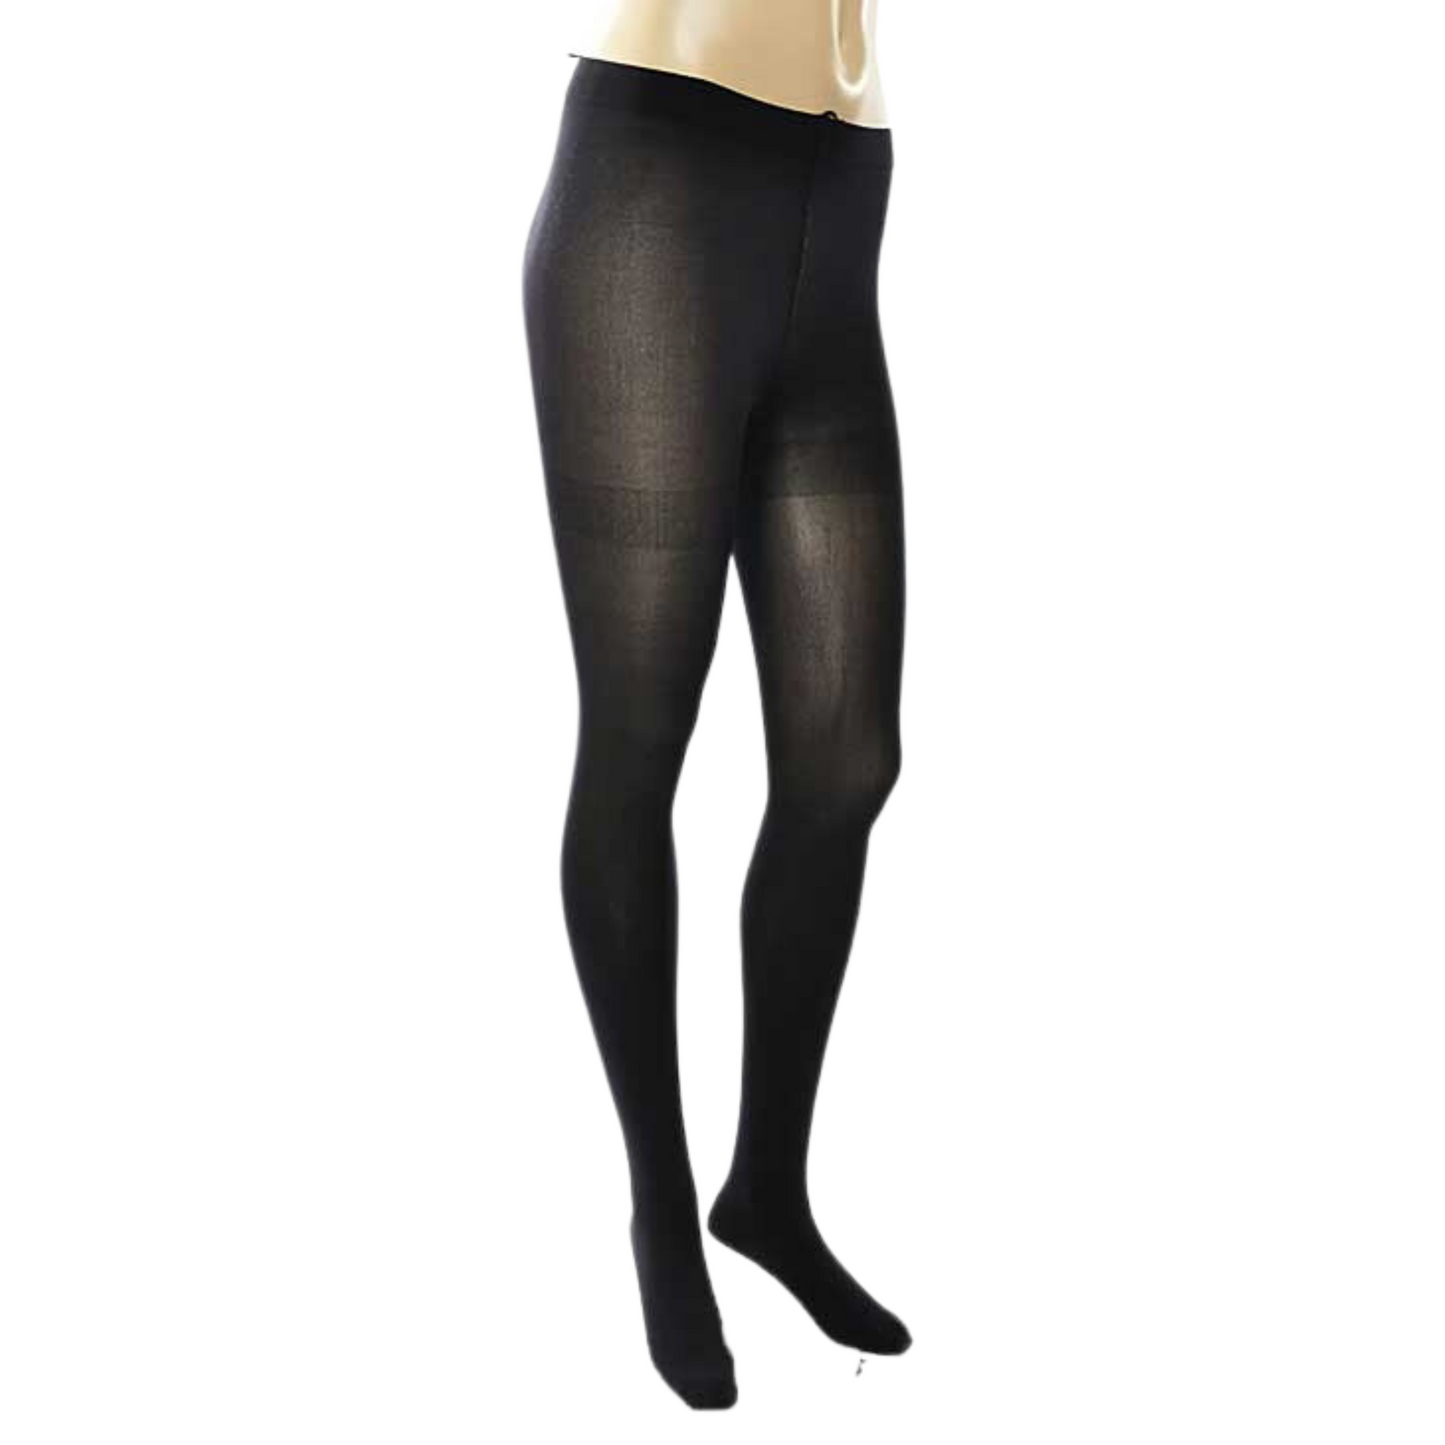 These classic opaque tights are a one-size-fits-all solution for any wardrobe. Each pair is crafted from a black-colored fabric for an opaque finish, providing coverage and a comfortable fit.